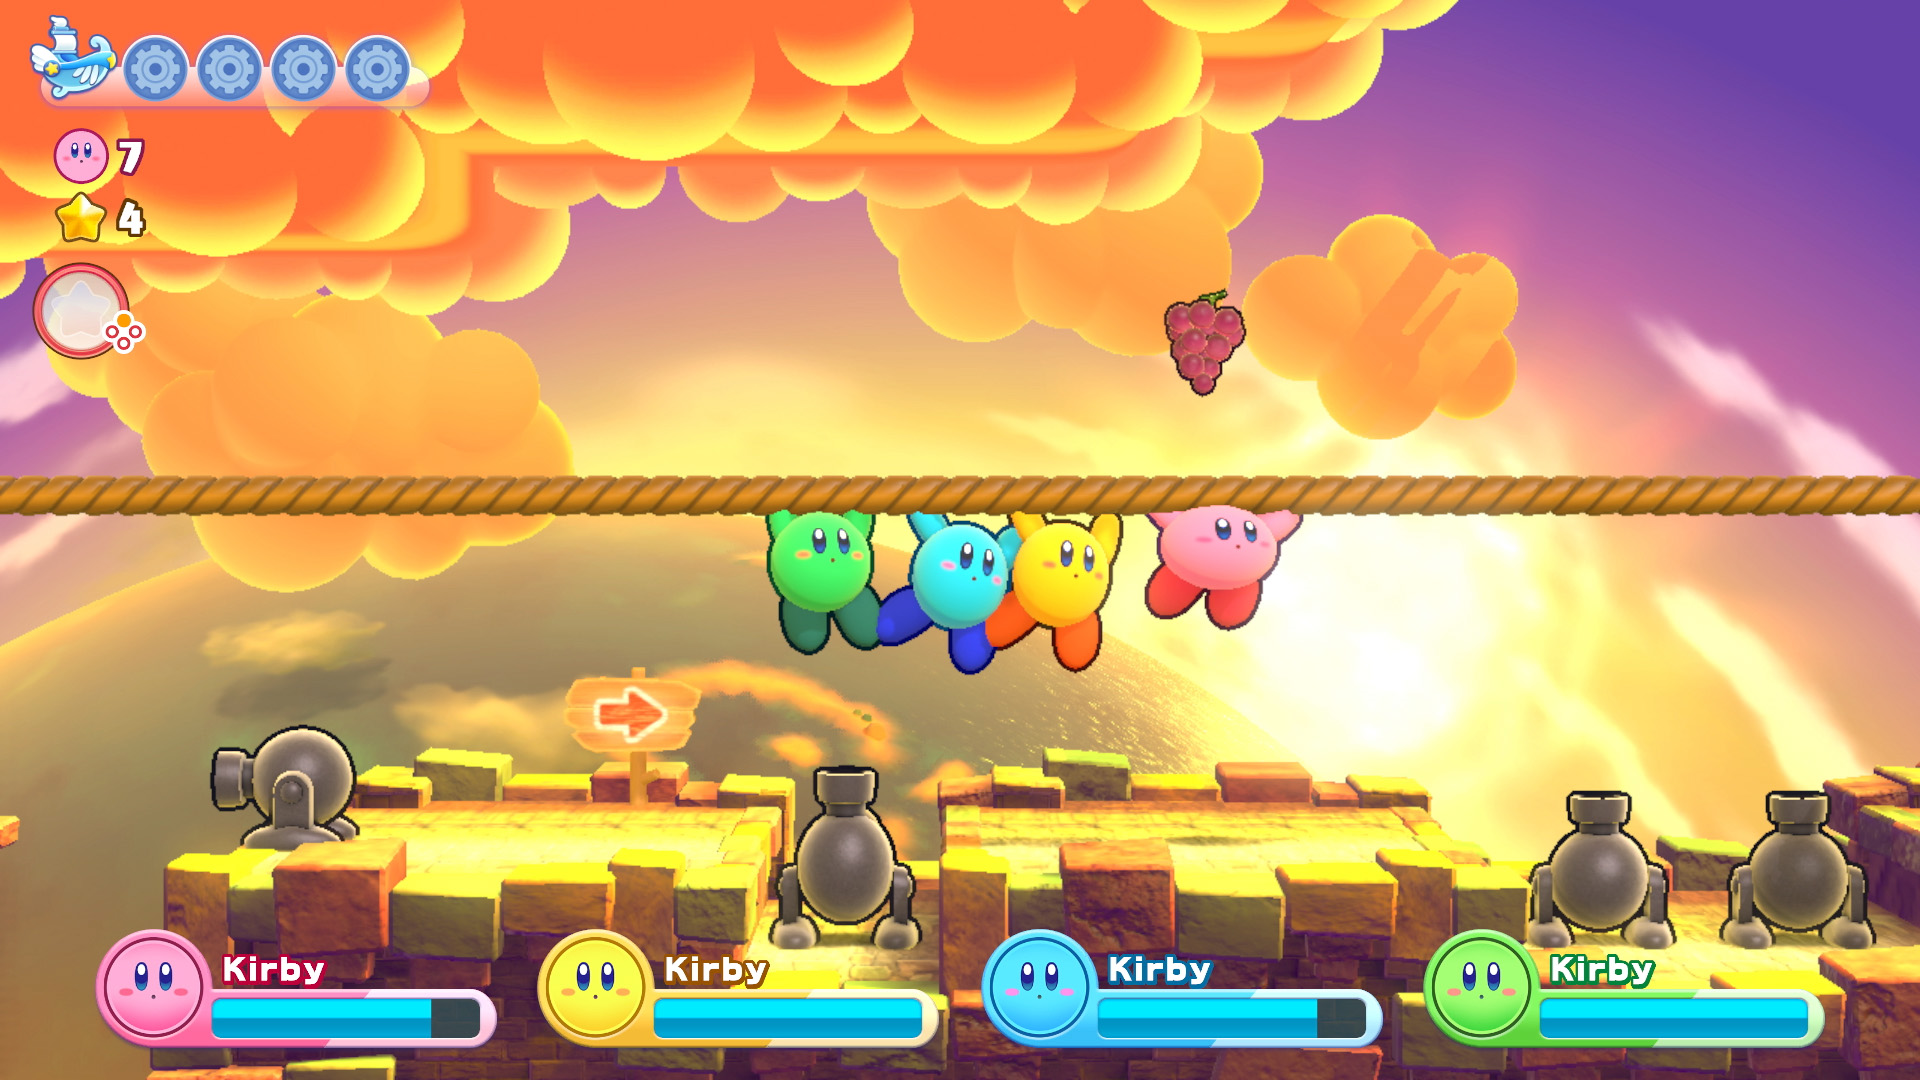 Kirby's Return to Dream Land Deluxe Nintendo Switch Account pixelpuffin.net Activation Link, 37.28$